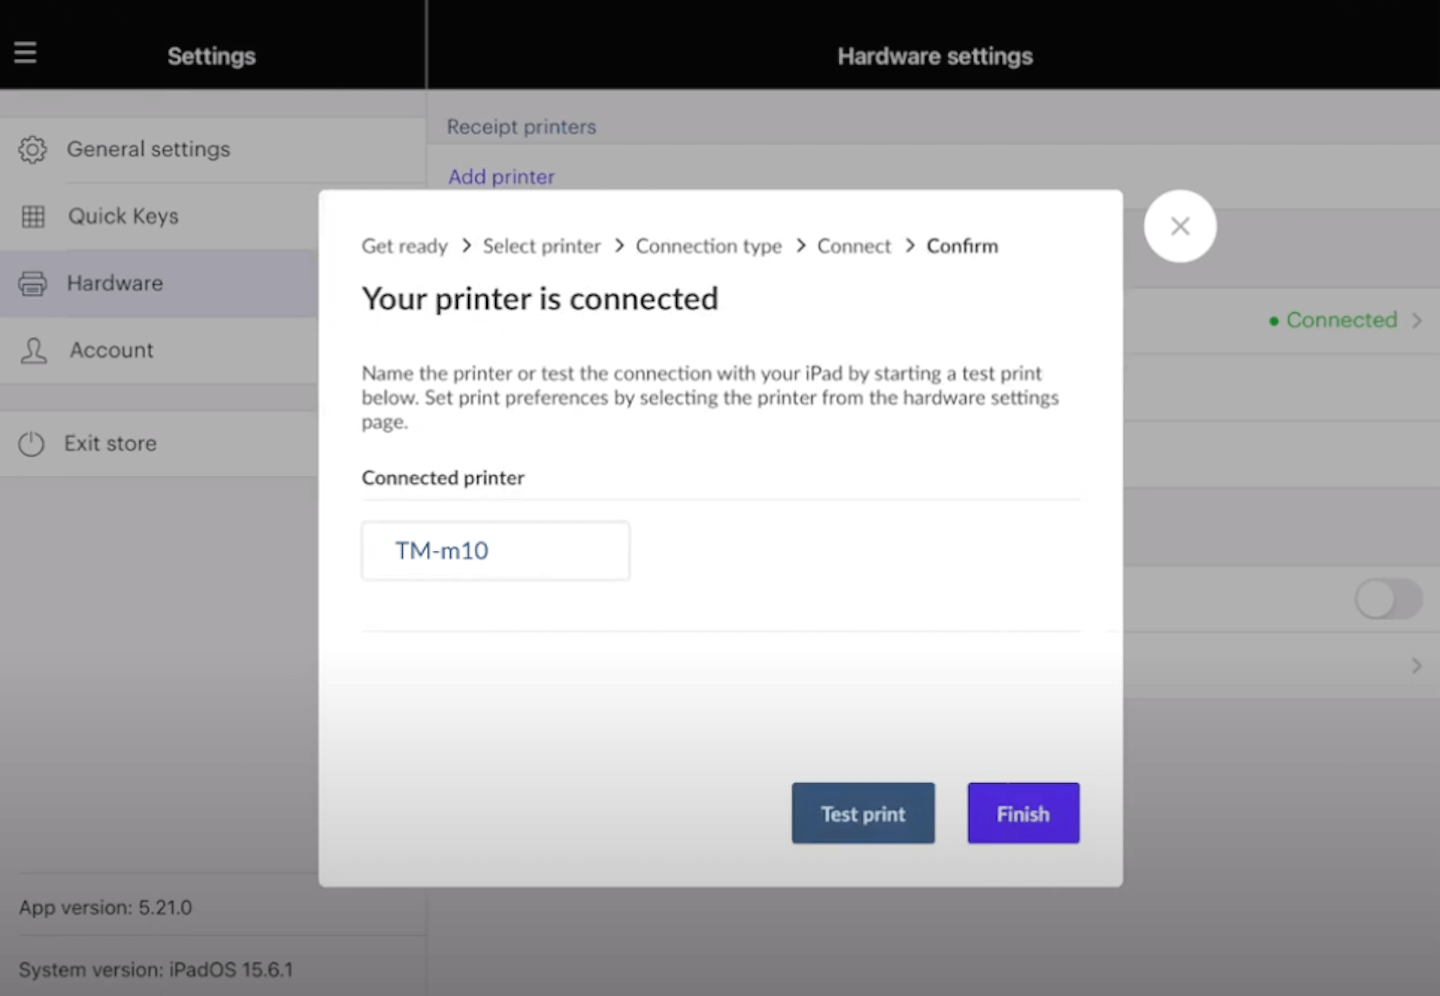 Pop-up confirming that the printer has been successfully connected.